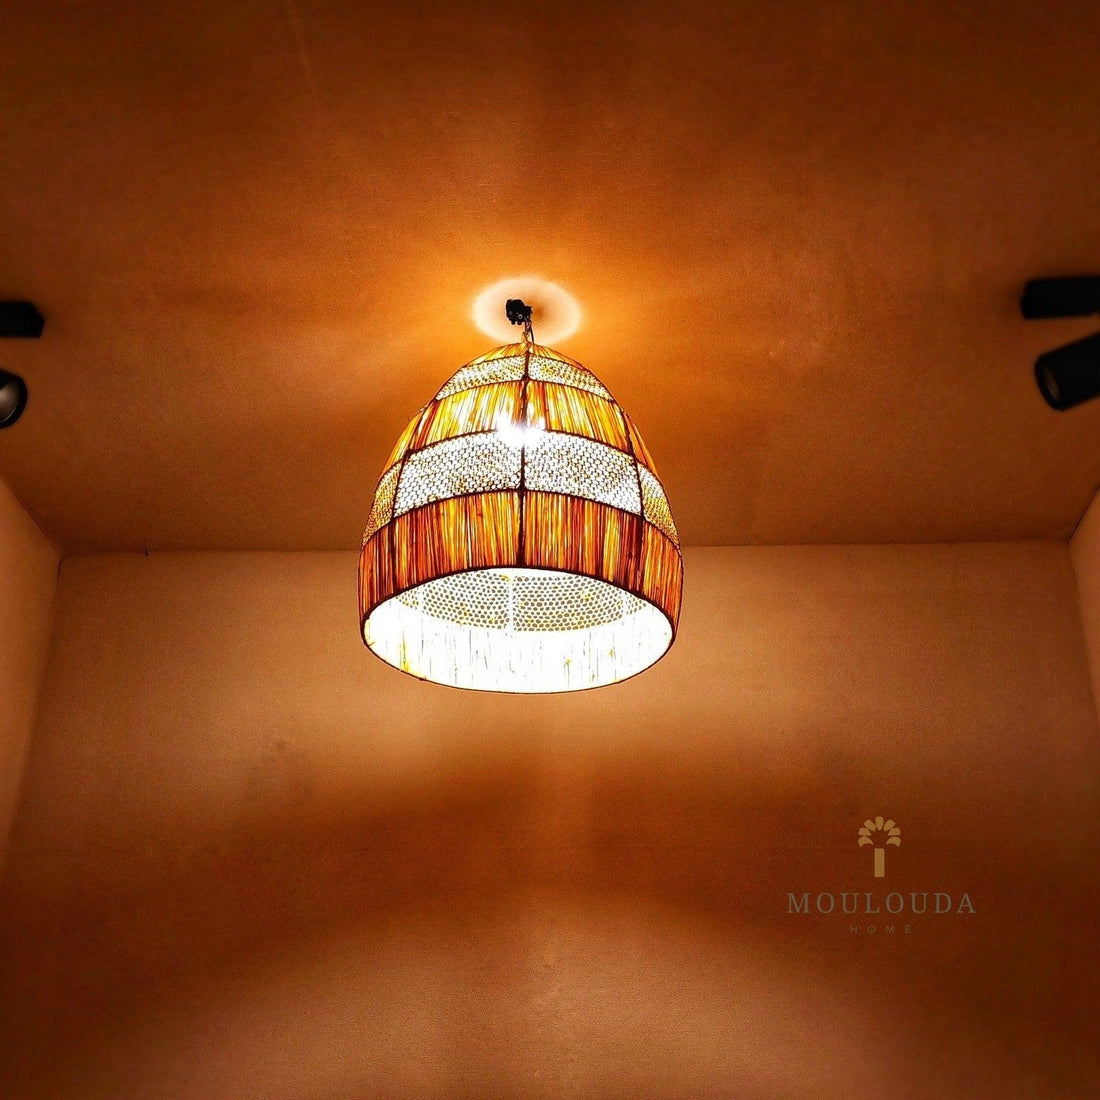 Illuminate Your Space with Mouloudacastle's Pendant Light Collection